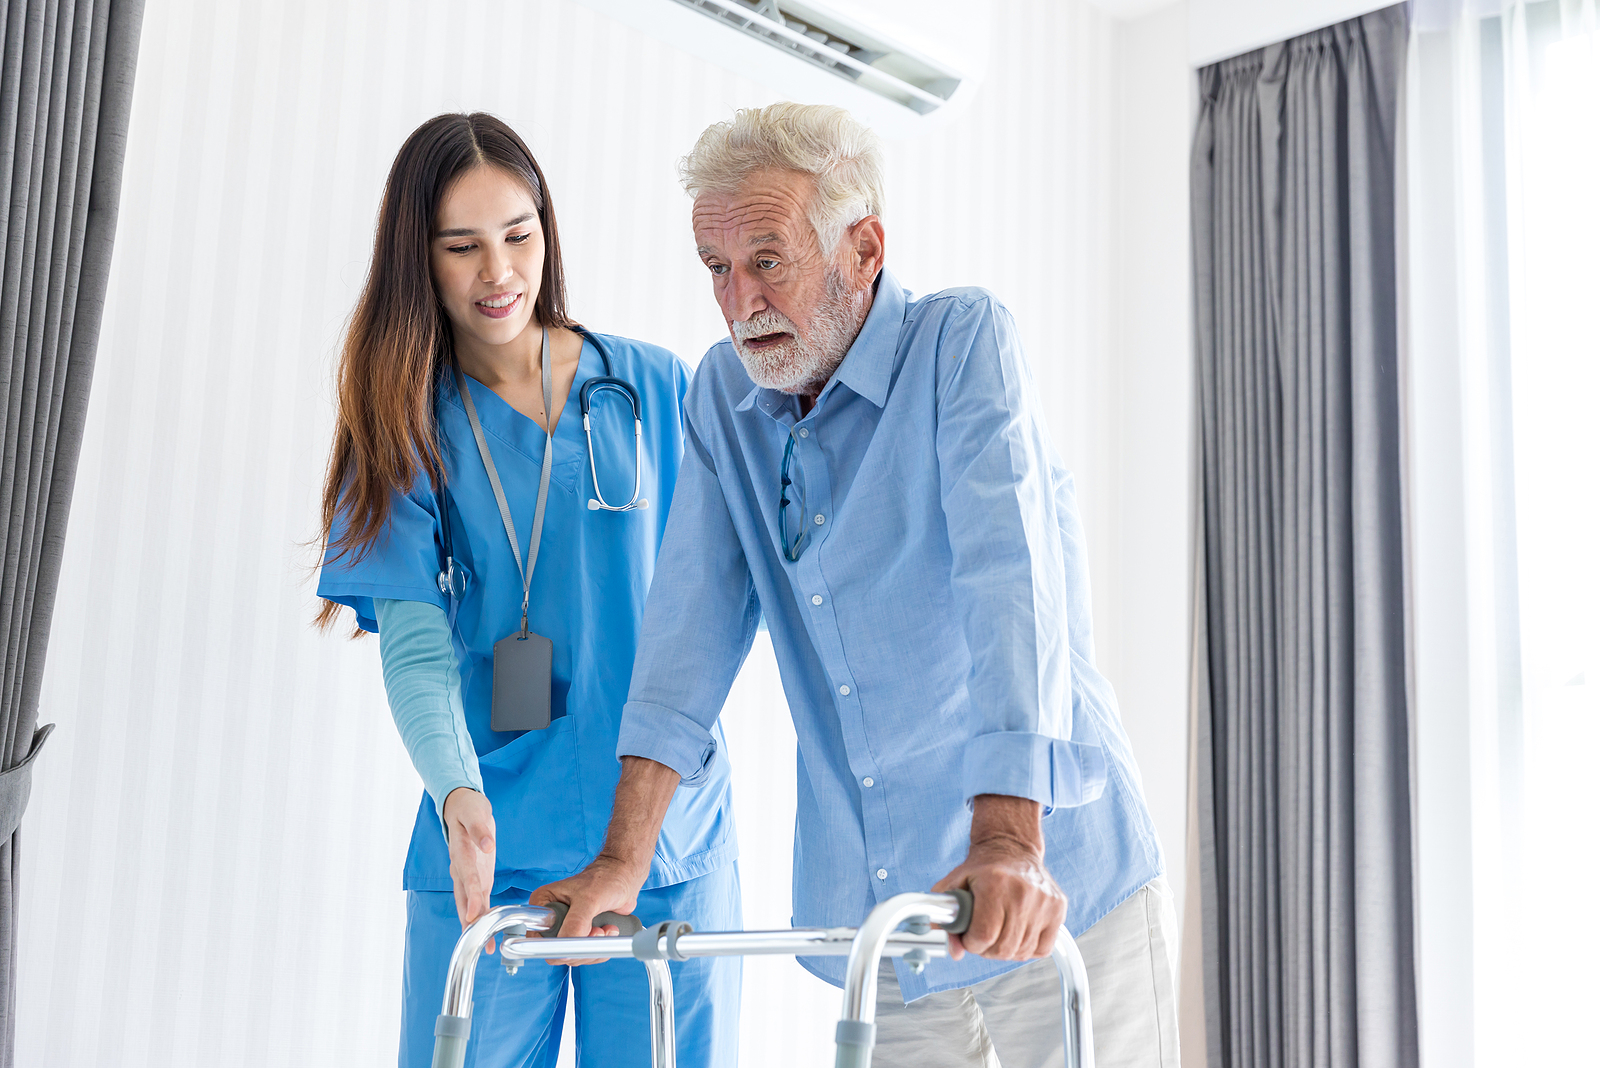 How Does 24-Hour Home Care Help With Chronic Conditions?